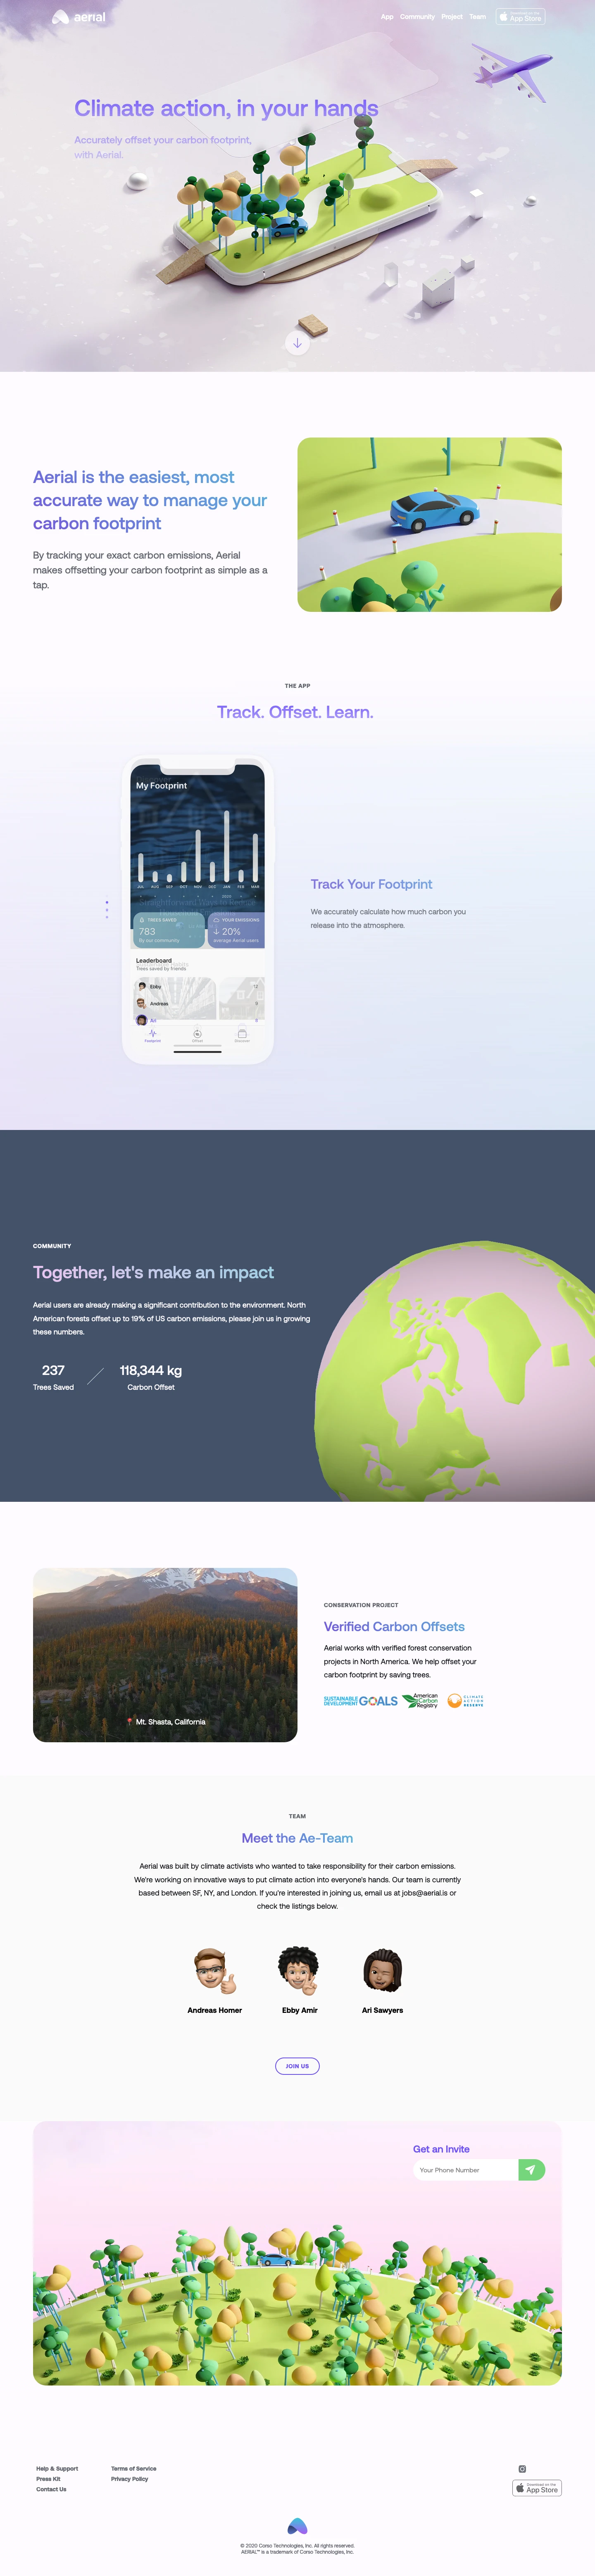 Aerial Landing Page Example: Track and offset your carbon footprint with Aerial for iPhone.